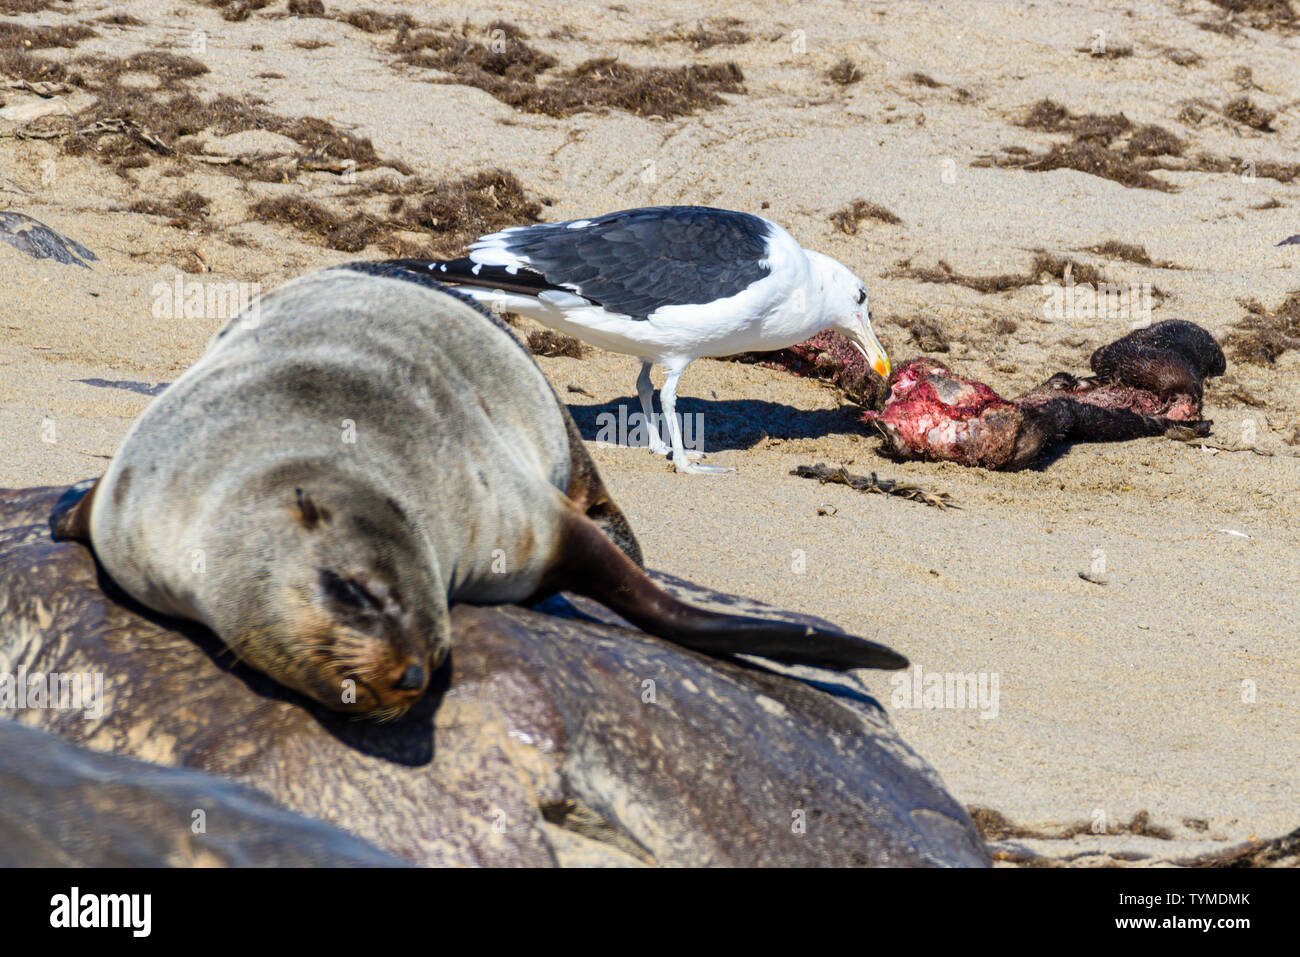 A black-backed gull eats from the carcase of a dead seal pup at one of the largest colonies of Cape Fur Seals in the world, Cape Cross, Skeleton Coast Stock Photo